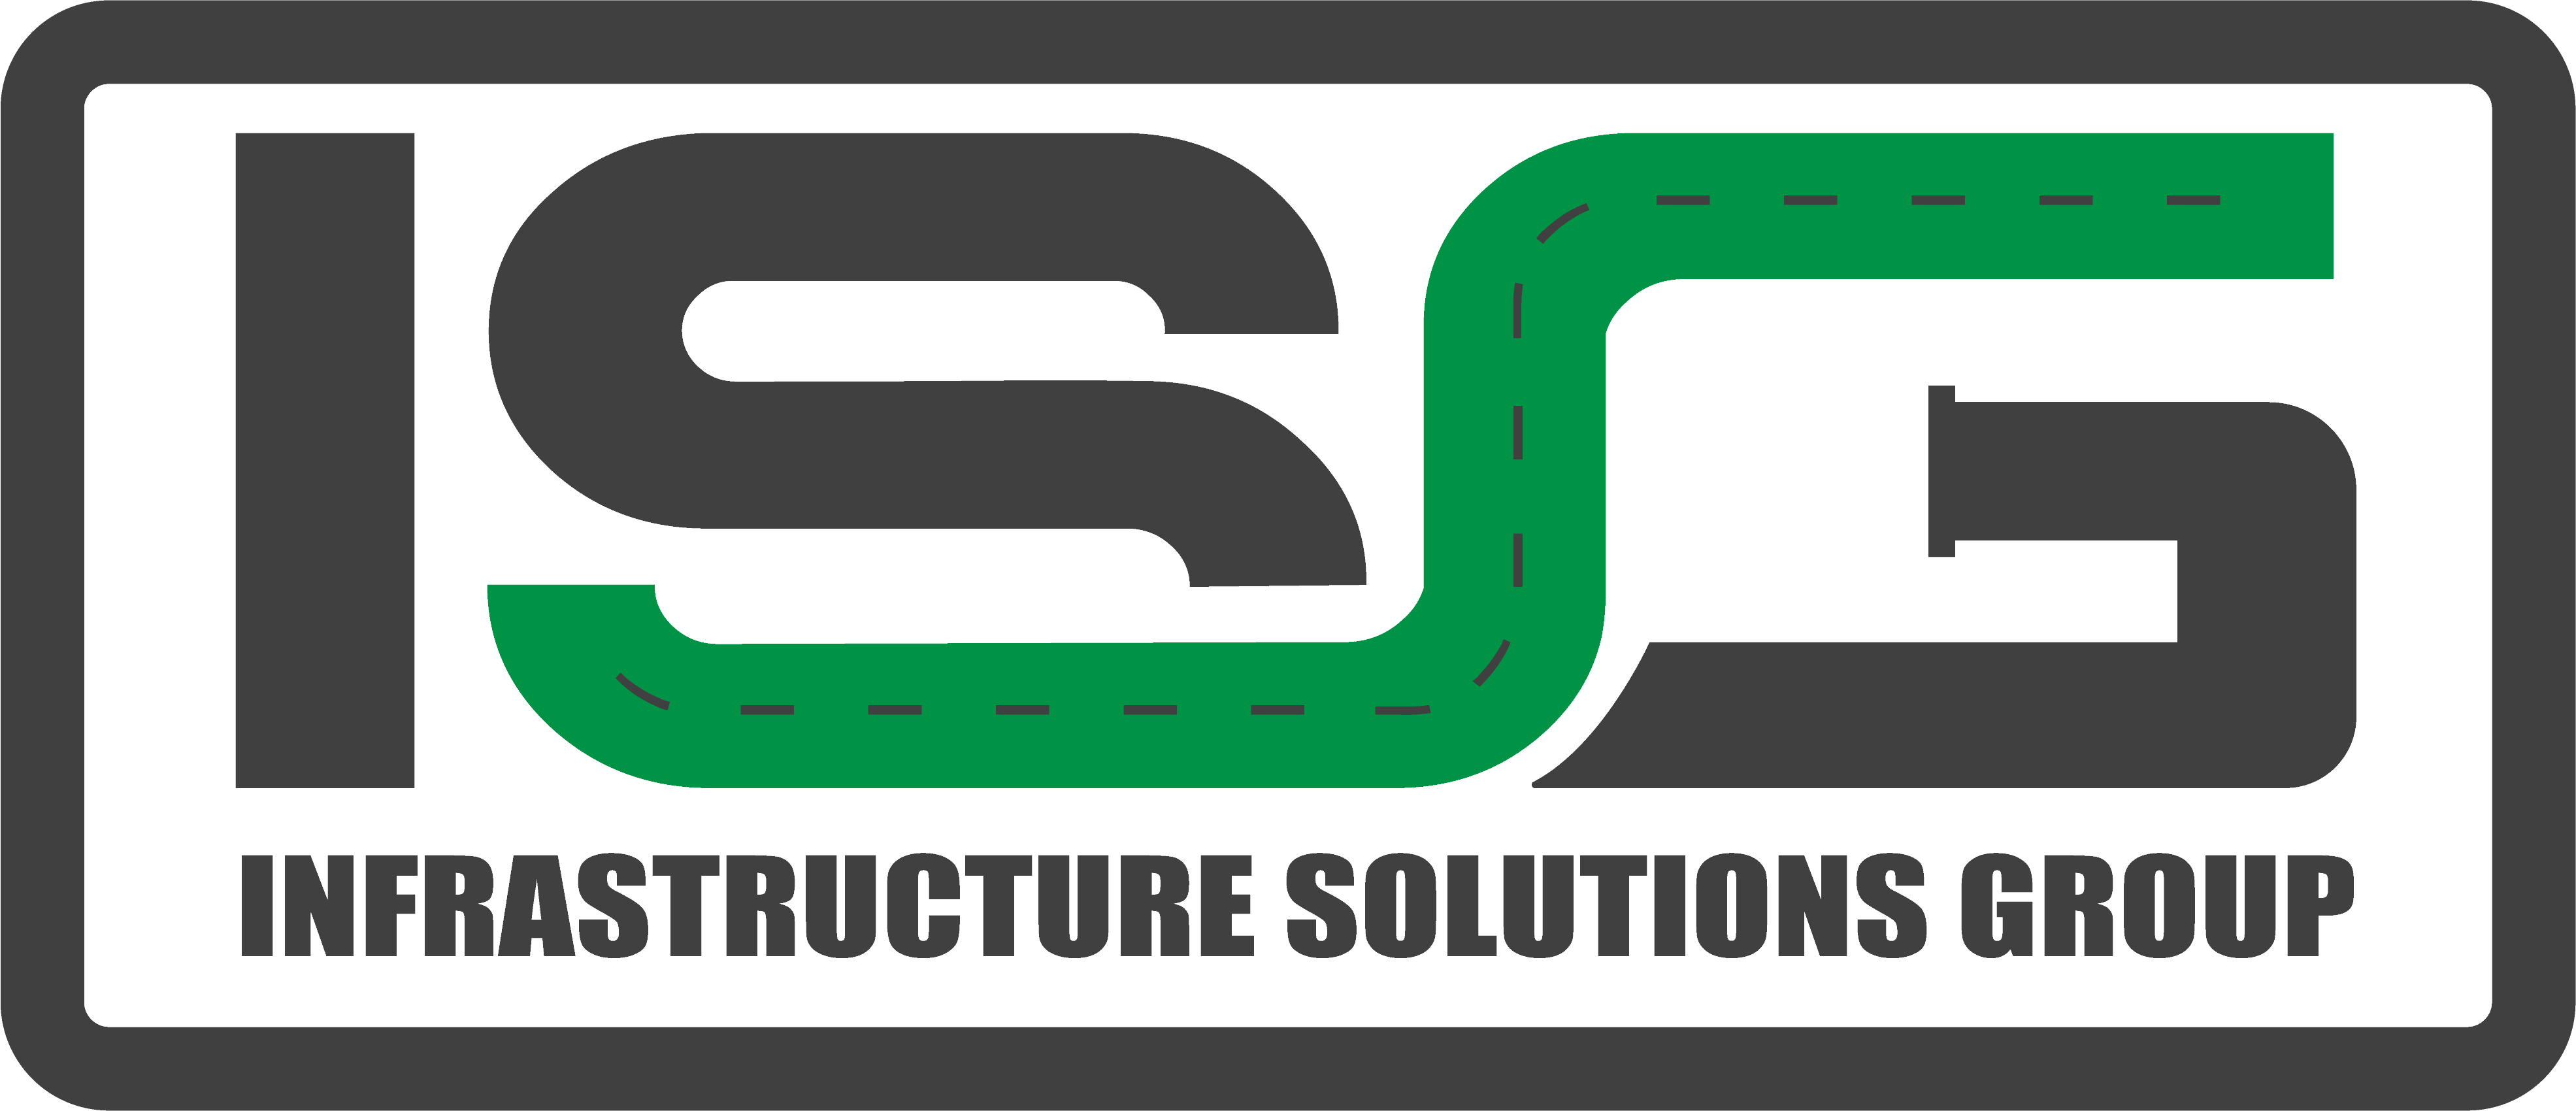 Company logo for 'Infrastructure Solutions Group'.